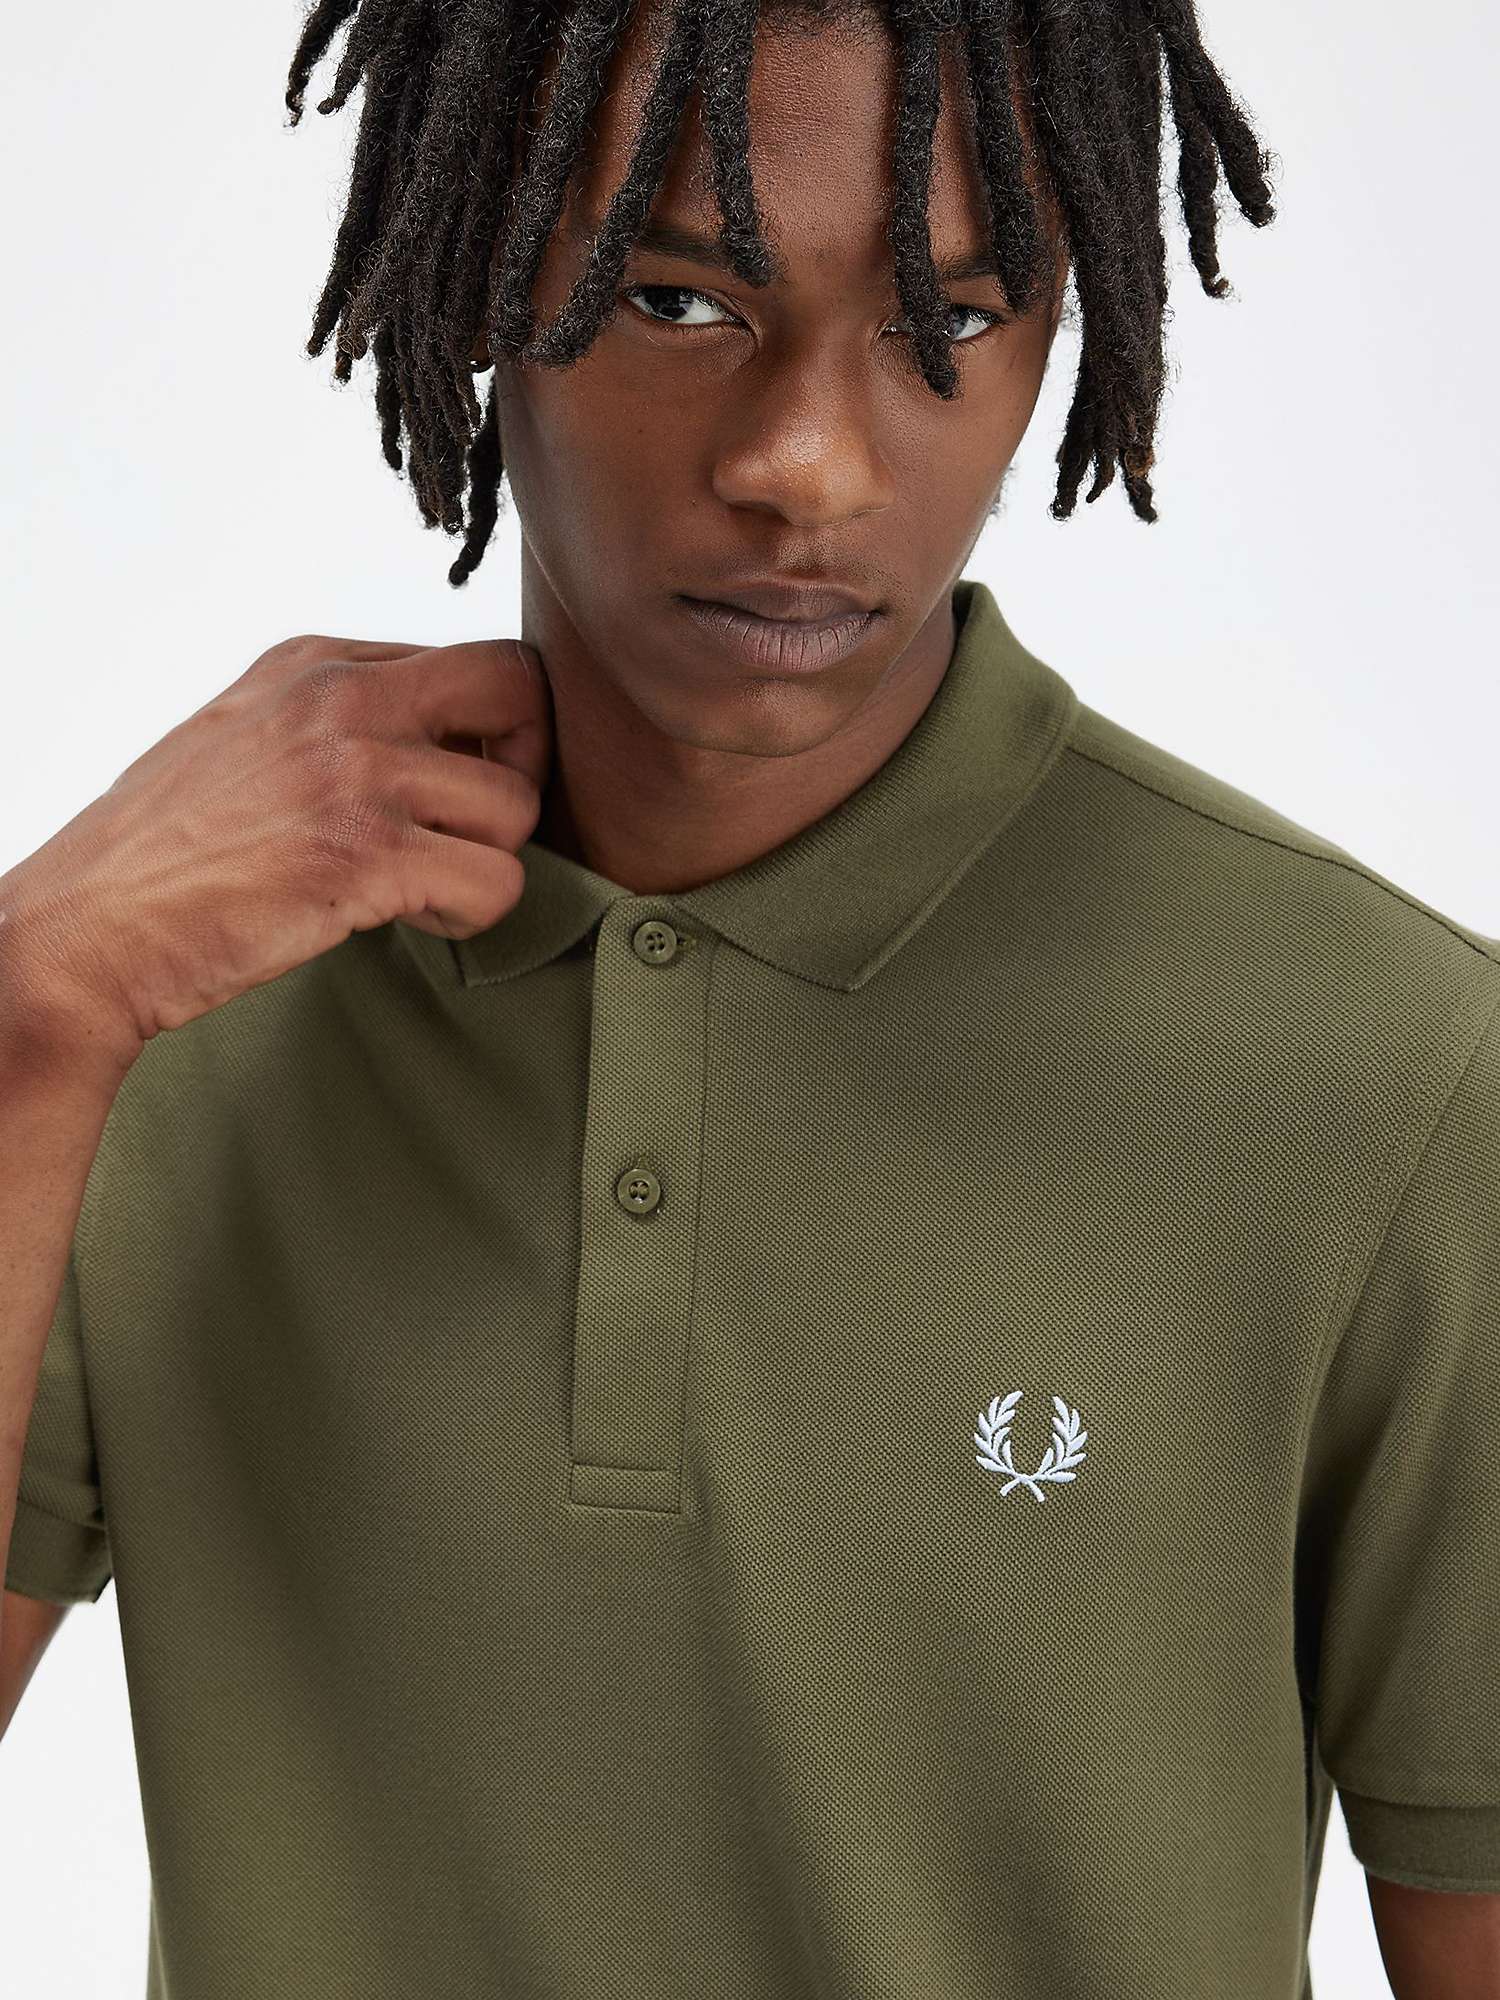 Buy Fred Perry Tennis Short Sleeve T-Shirt Online at johnlewis.com